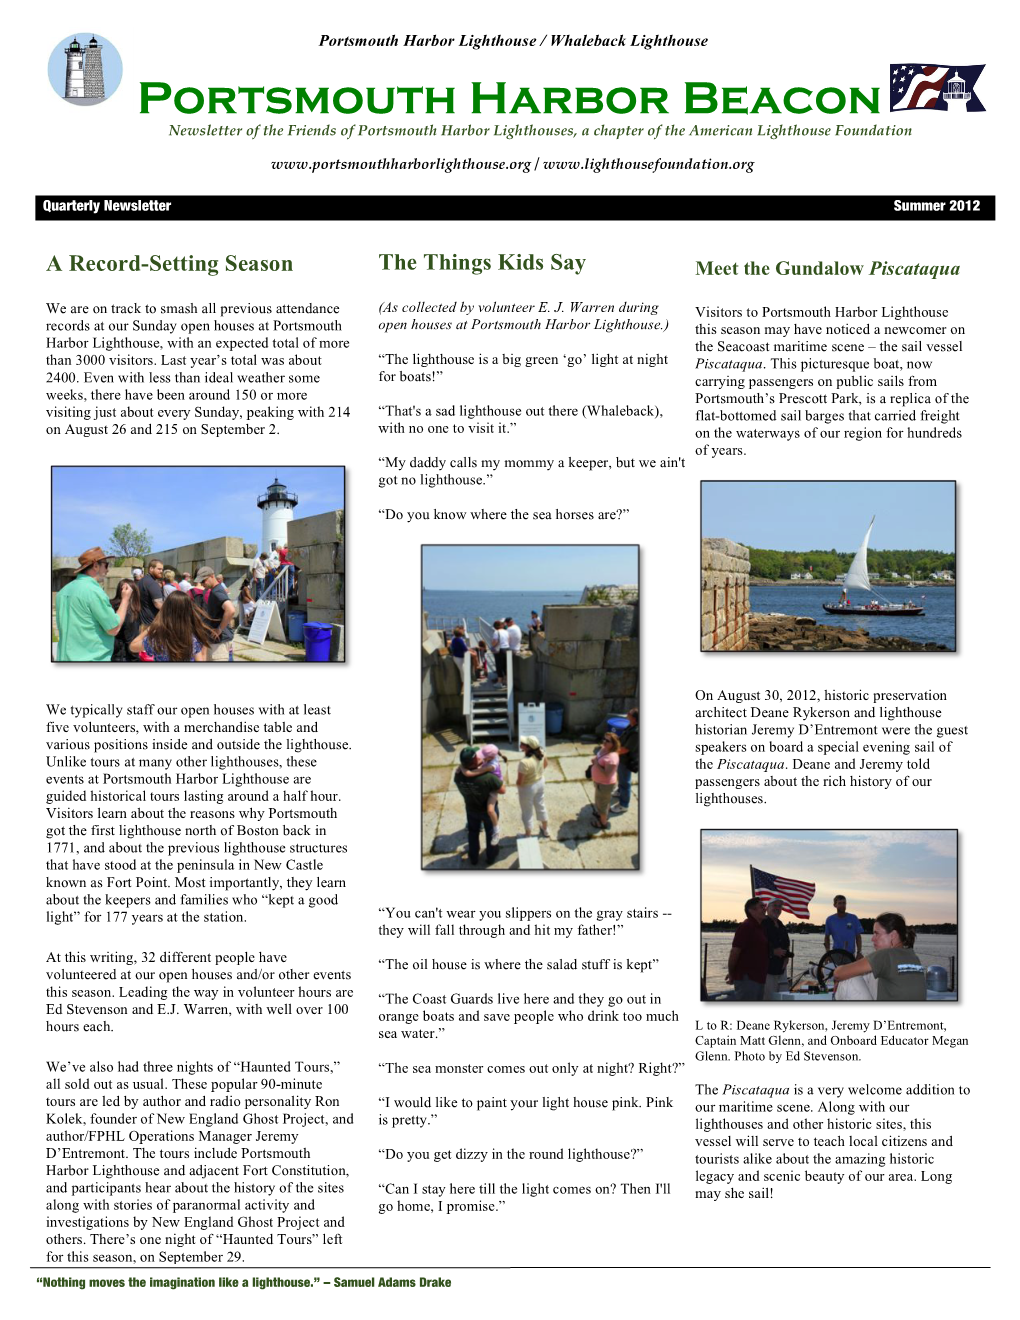 Portsmouth Harbor Beacon Newsletter of the Friends of Portsmouth Harbor Lighthouses, a Chapter of the American Lighthouse Foundation